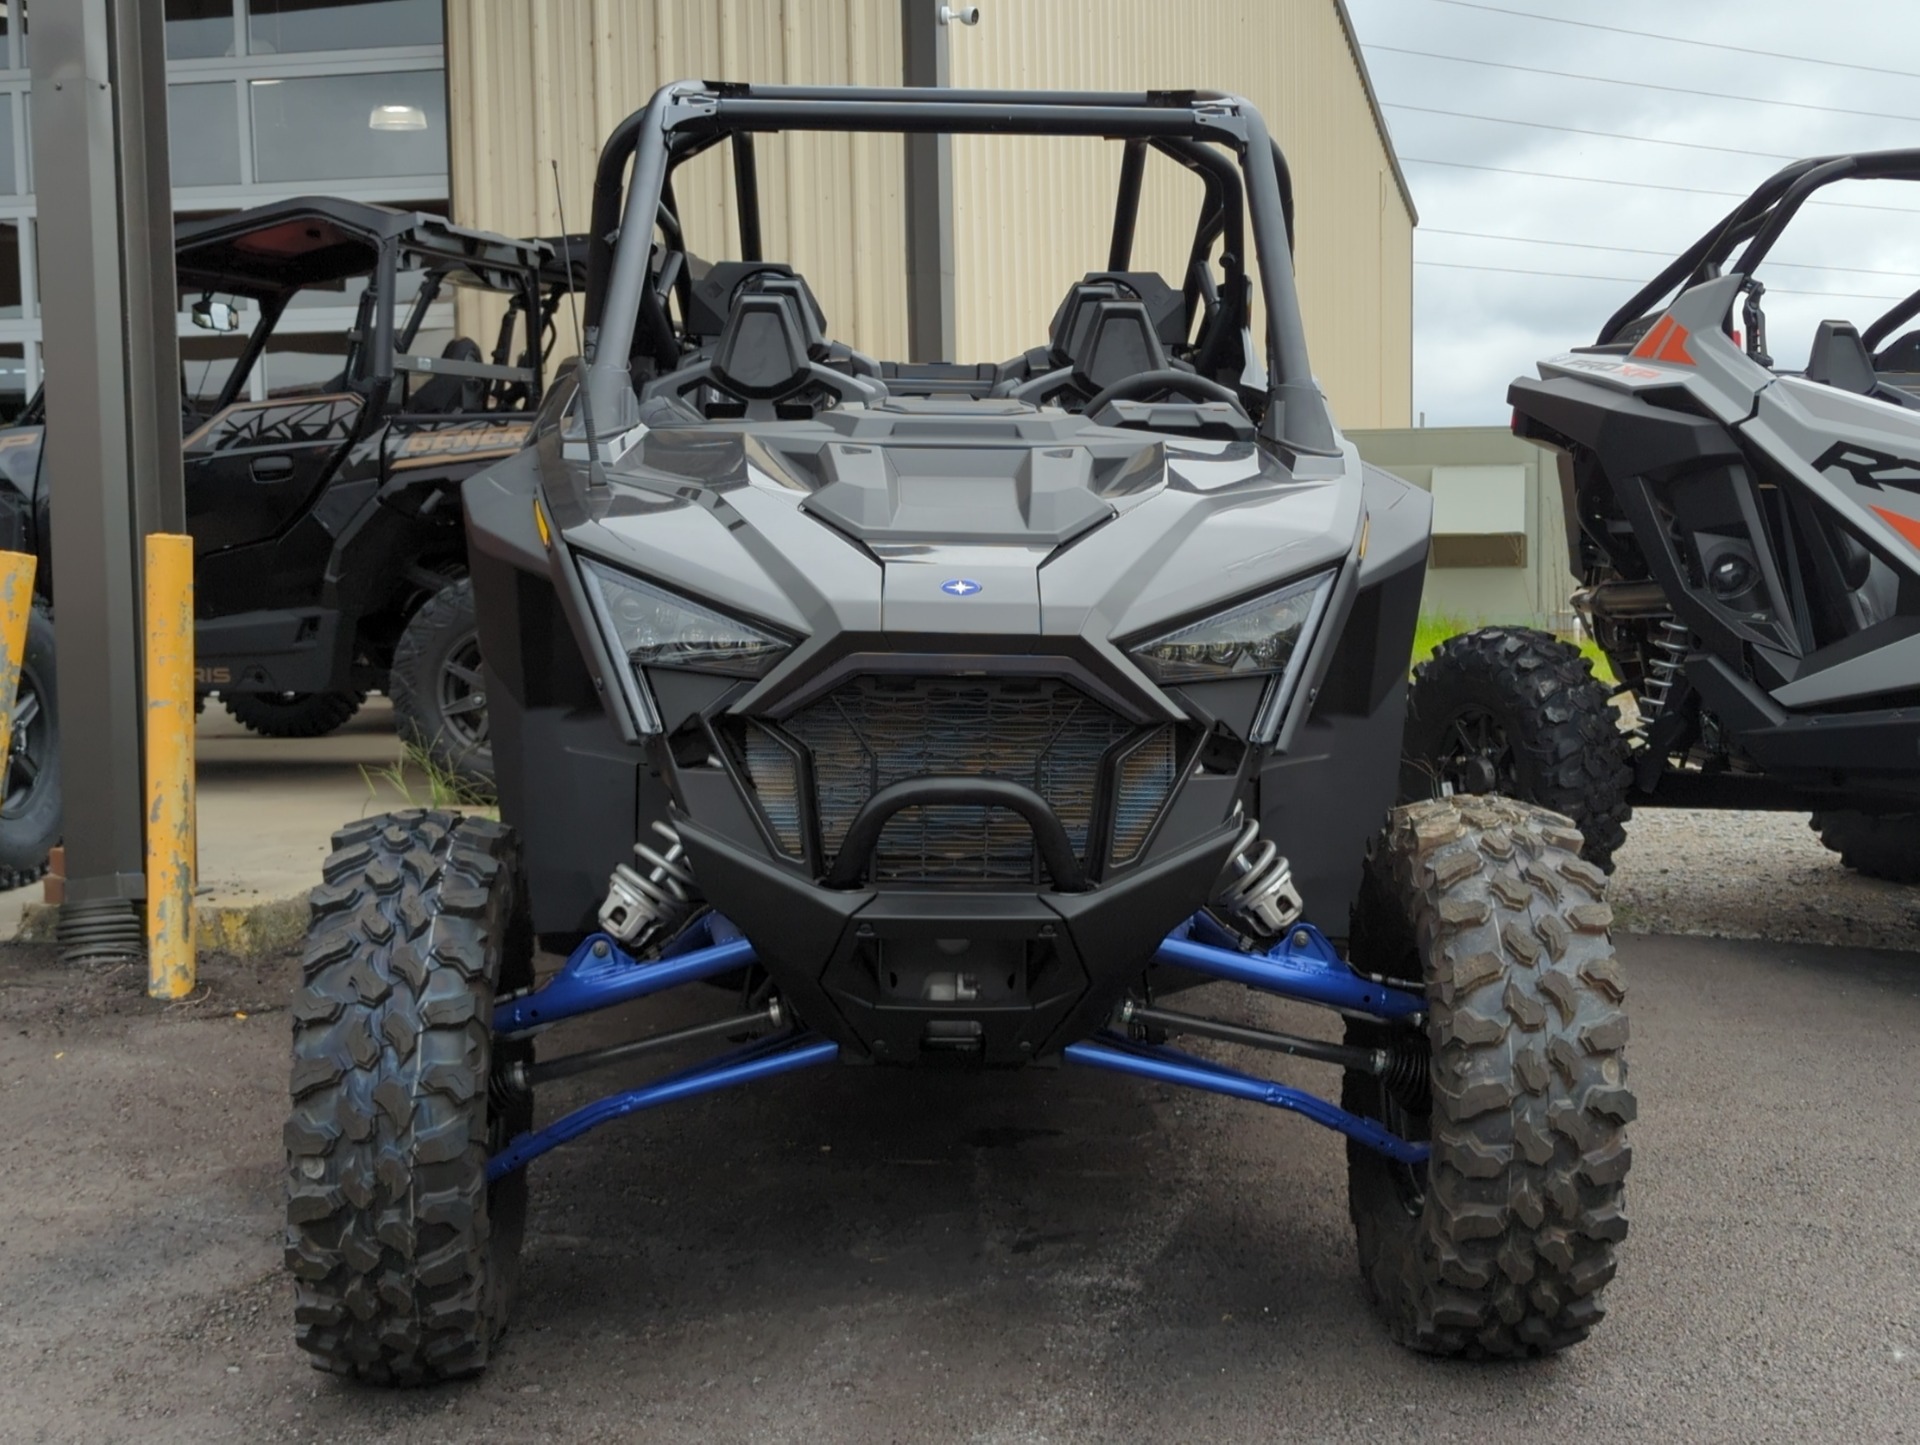 2022 Polaris RZR PRO XP 4 Ultimate in Winchester, Tennessee - Photo 1